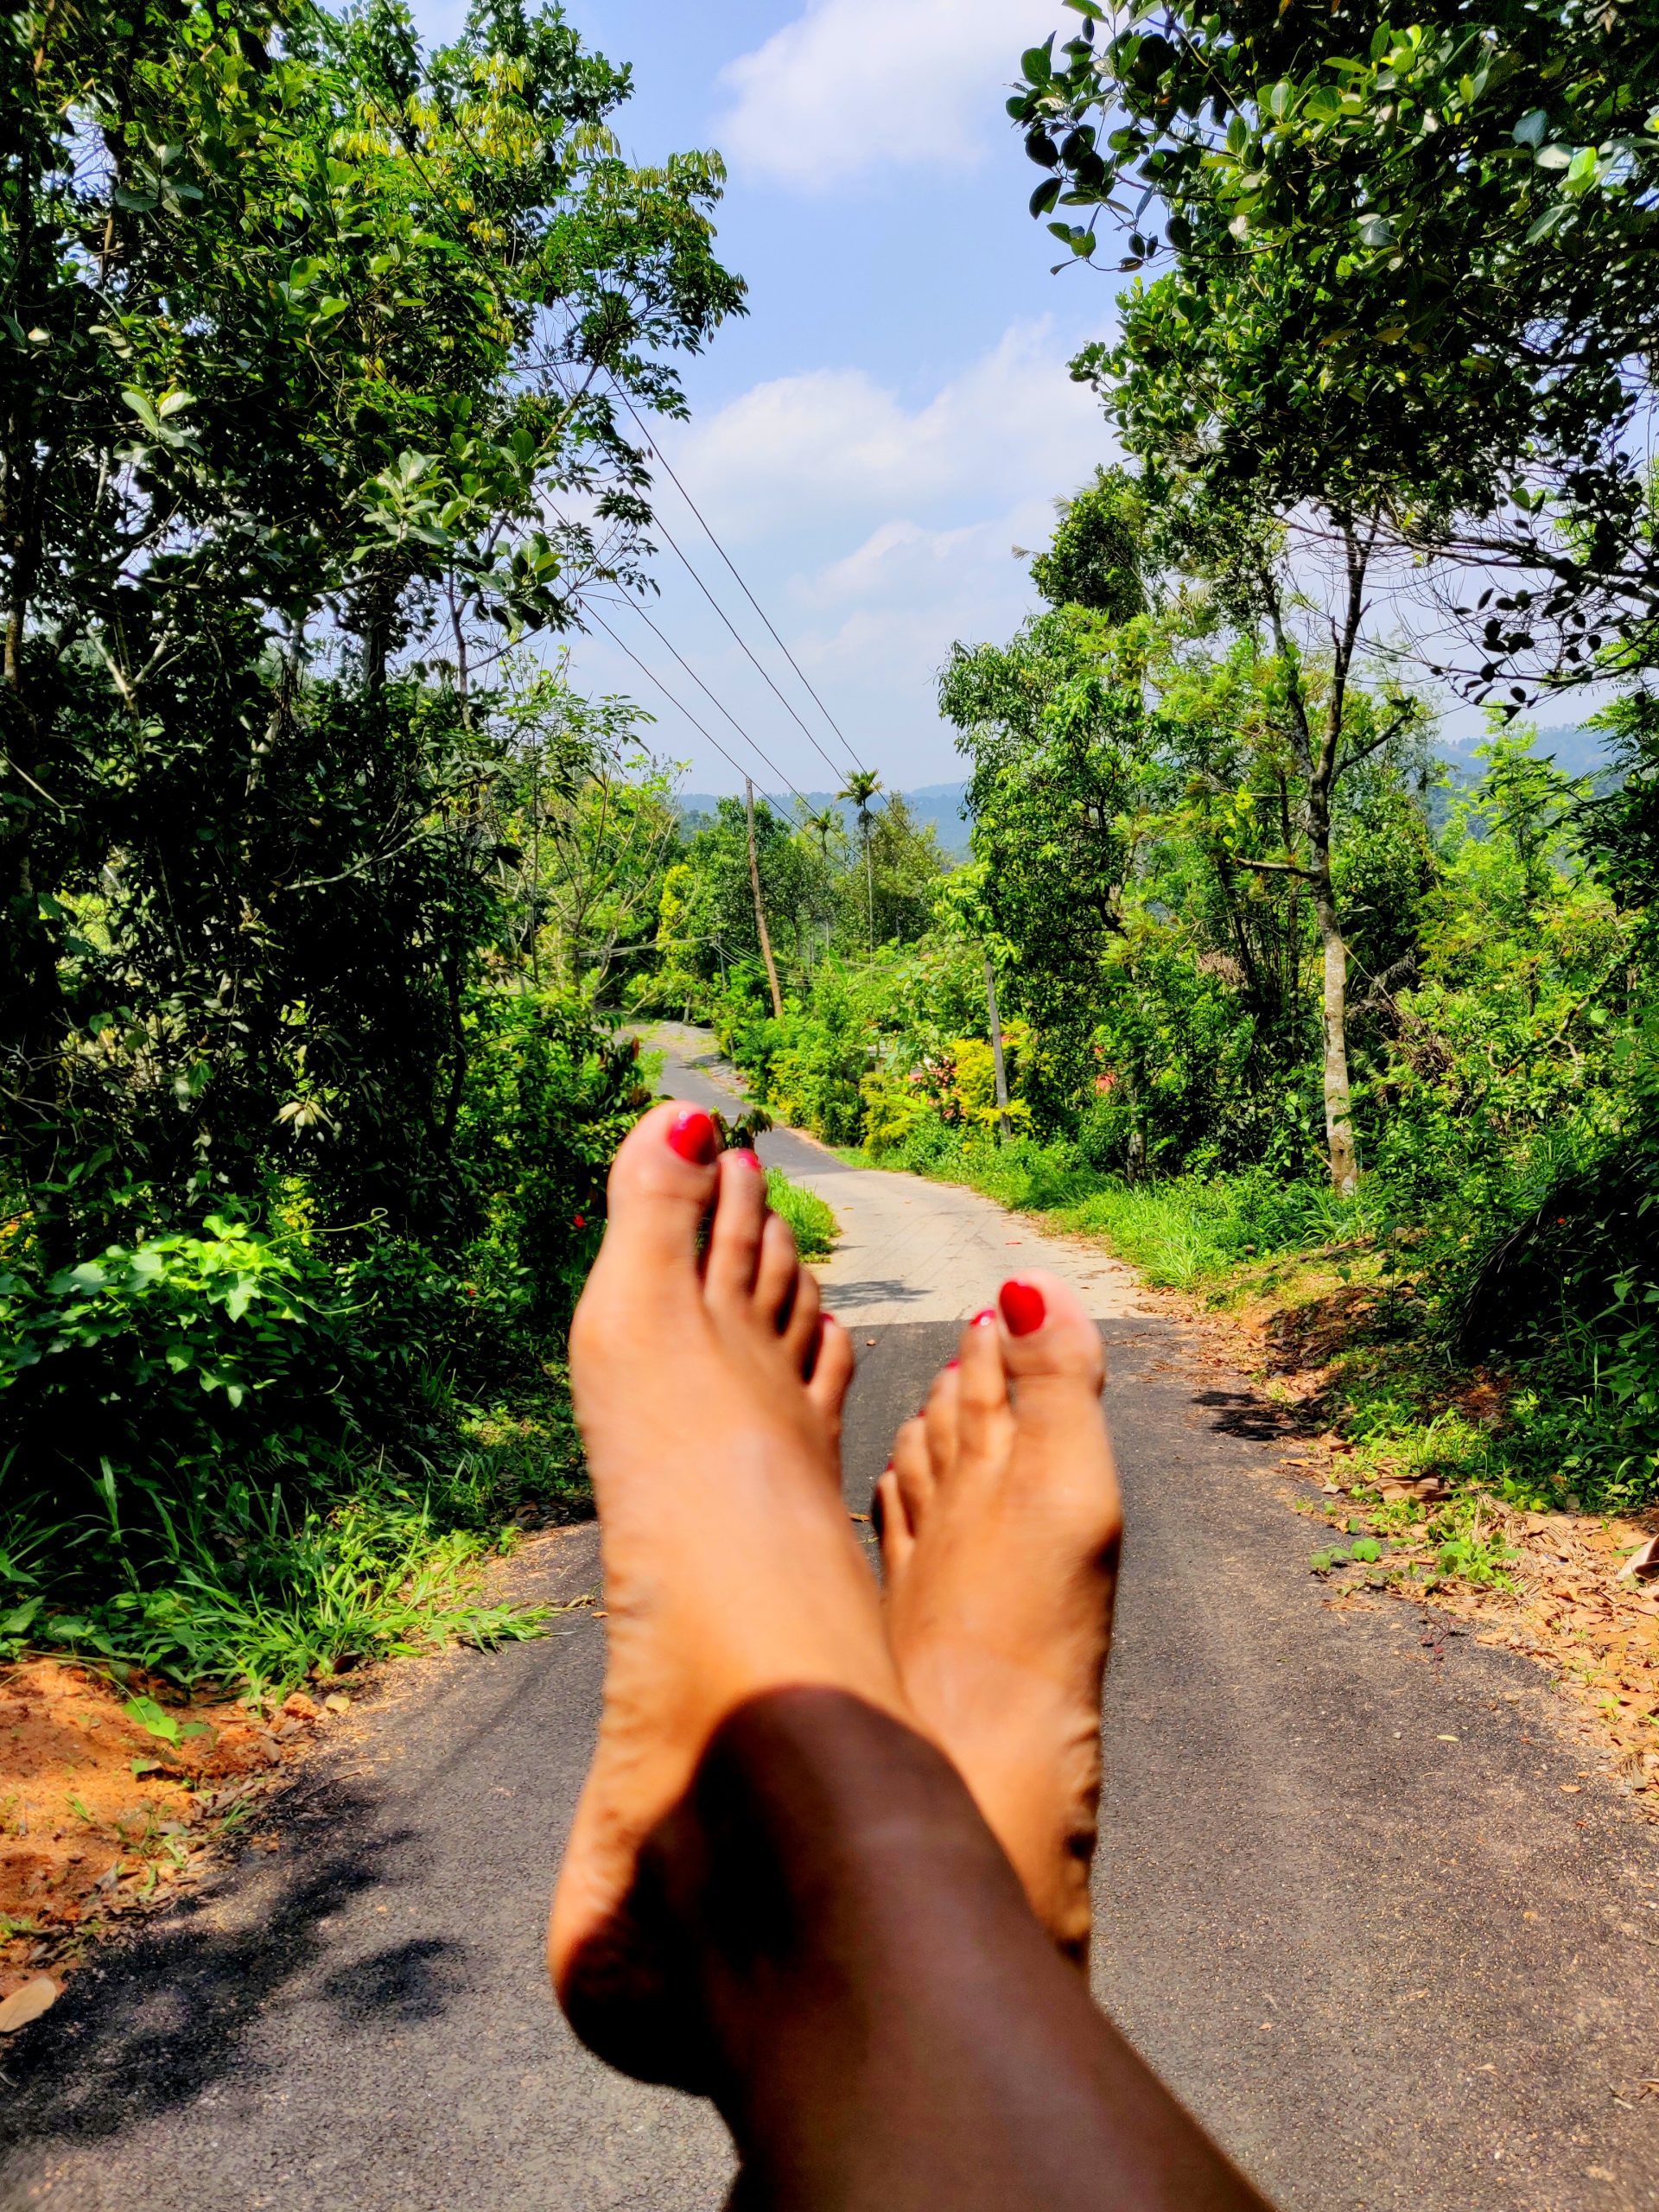 Go for a road trip along the Western Ghats